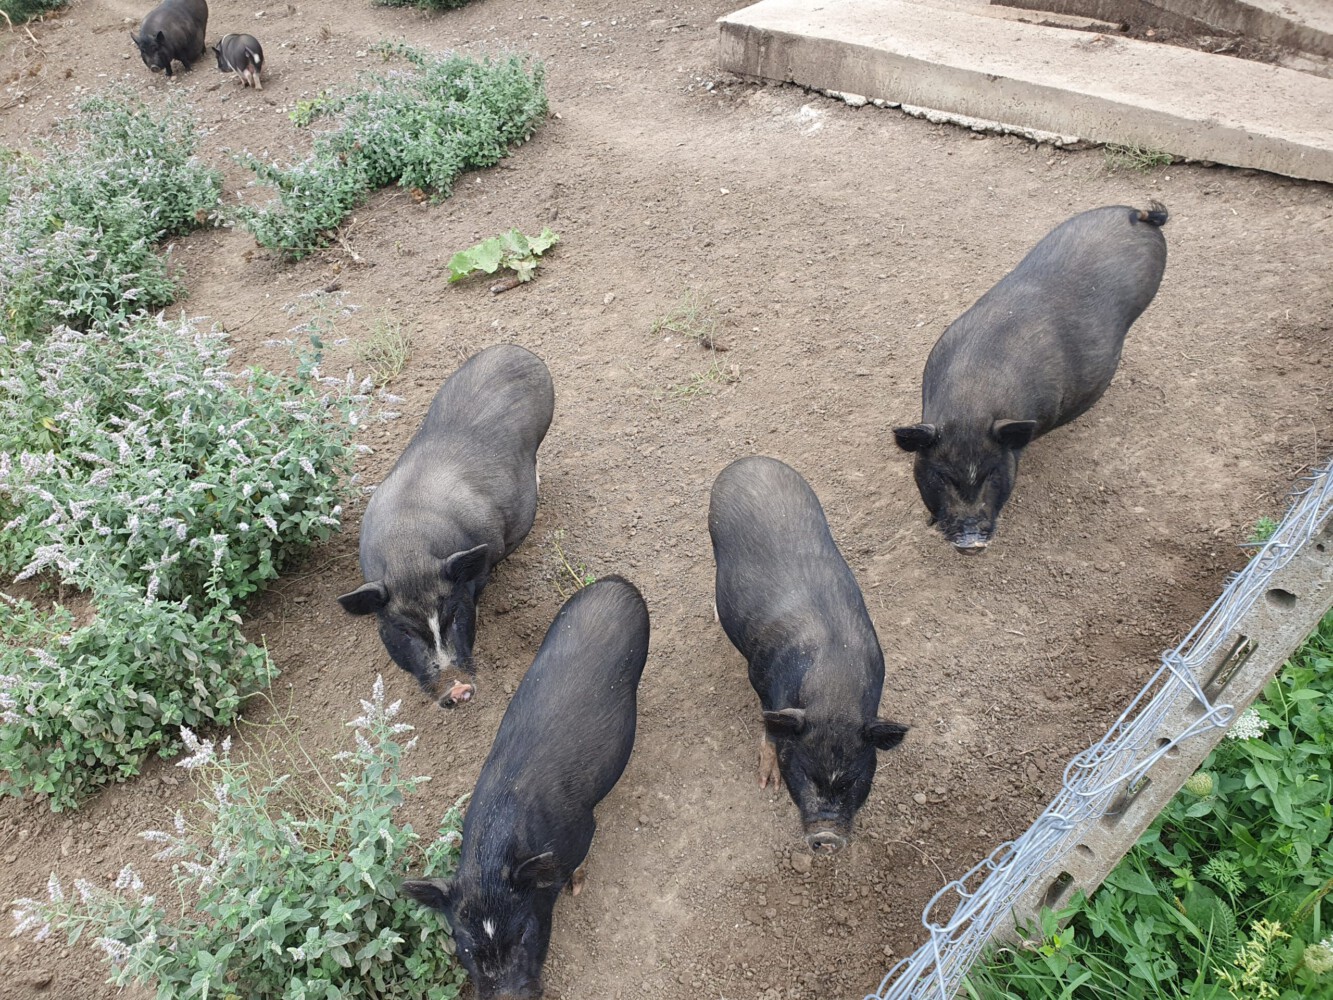 Piggies from above - what is going on here?